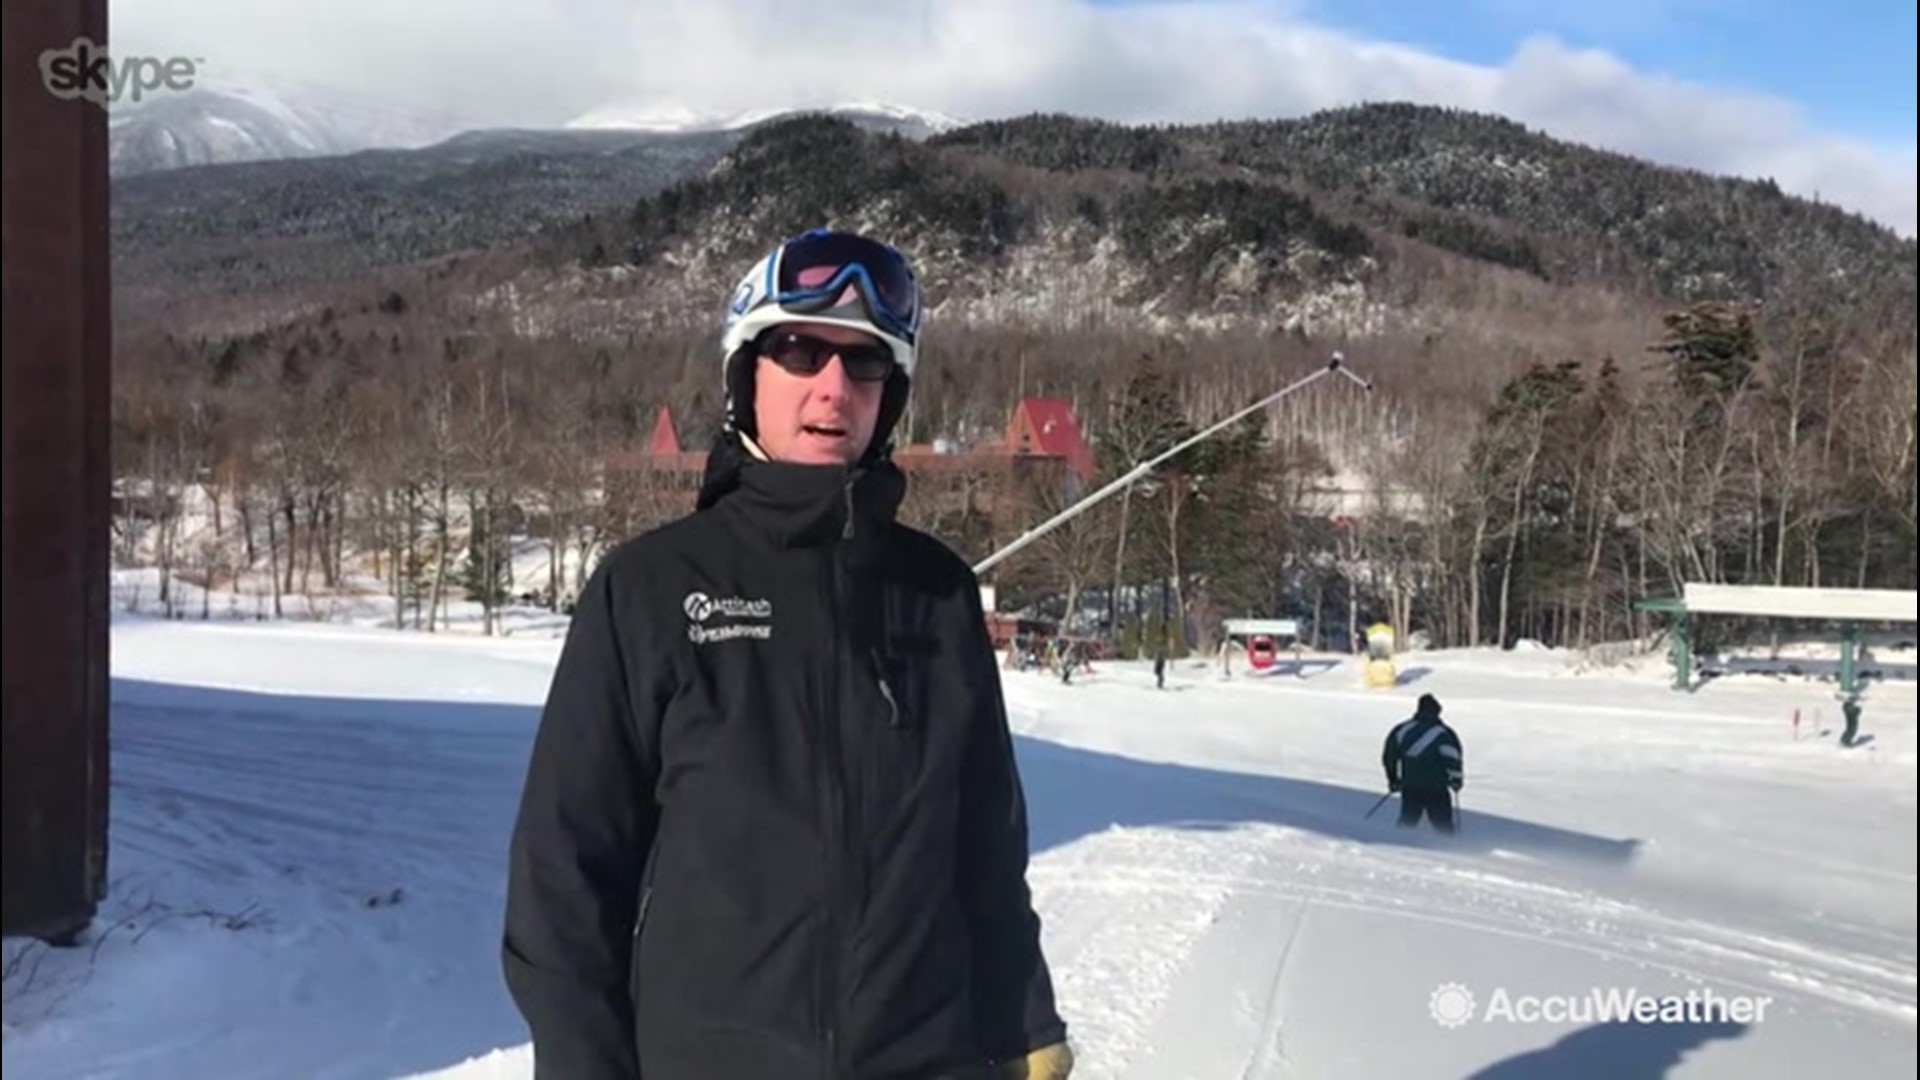 Brian Heon, General Manager for Wildcat Mountain in Gorham, New Hampshire, joined the AccuWeather Network this morning as they open up for ski season.